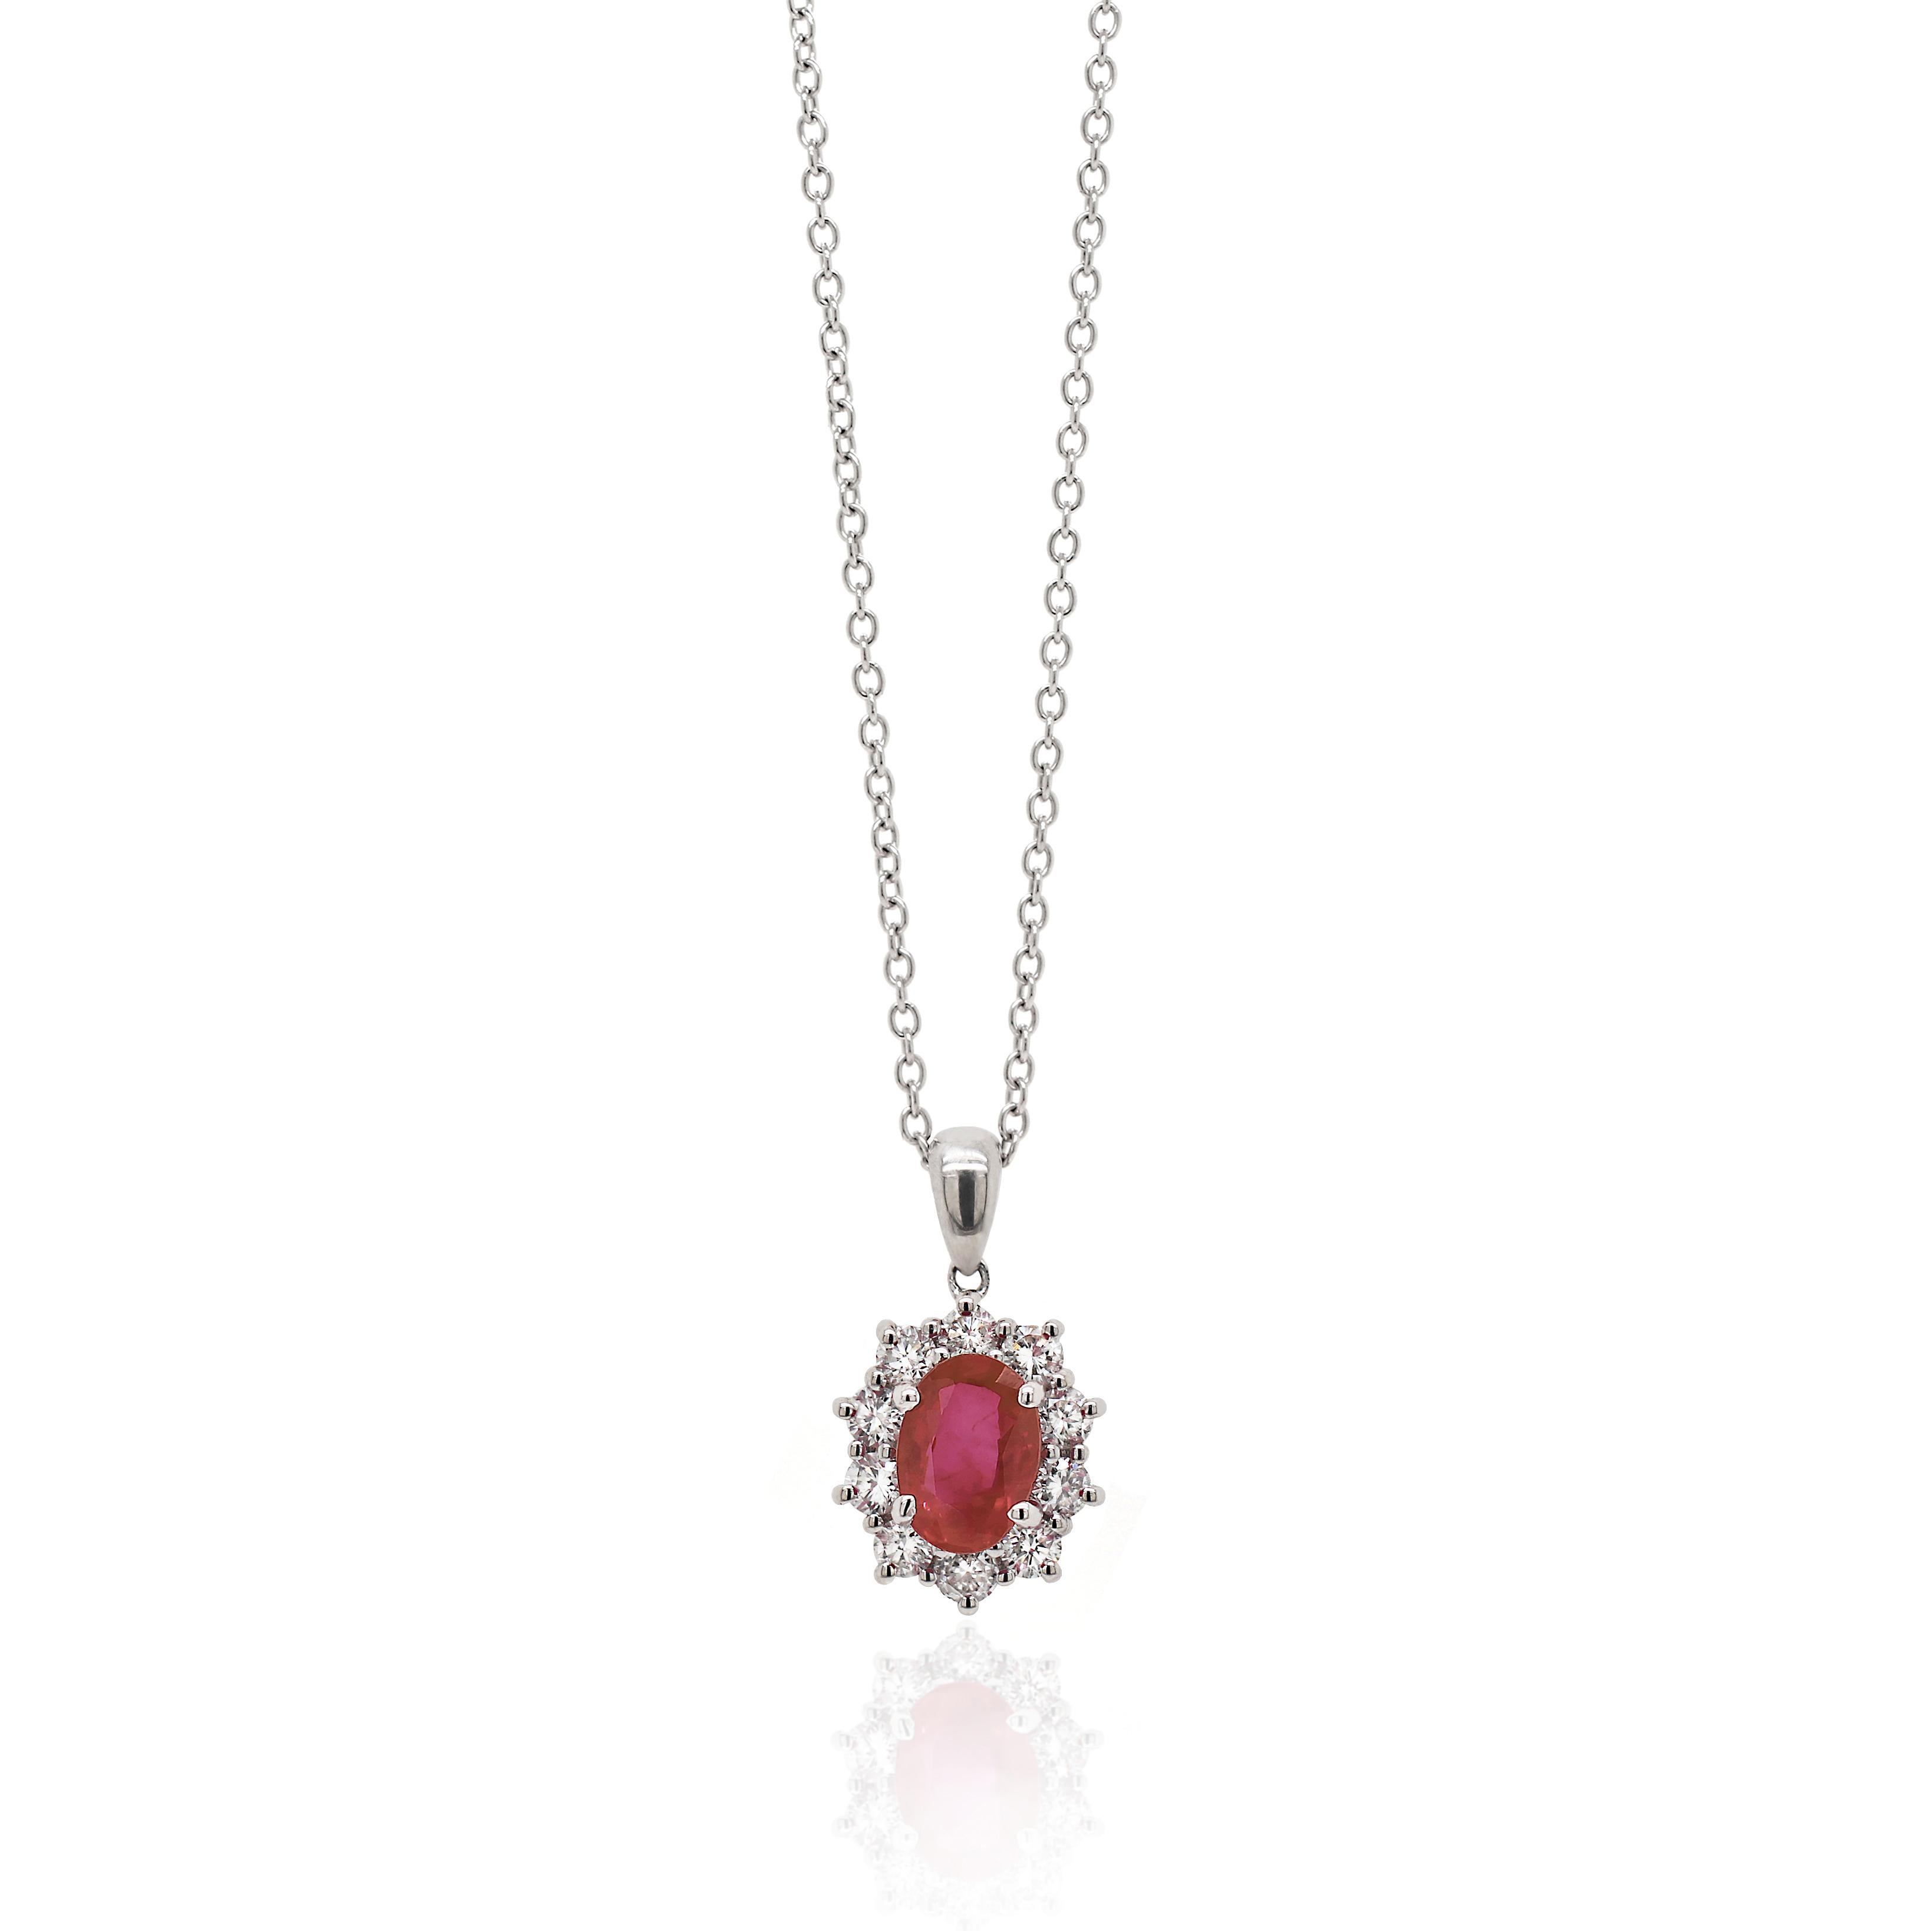 Pendant featuring a beautiful oval red ruby weighing 1.18ct set in a four claw open back setting. The ruby is surrounded by 10 fine quality round brilliant cut diamonds weighing a total of 0.50ct all claw set in 18ct white gold. 